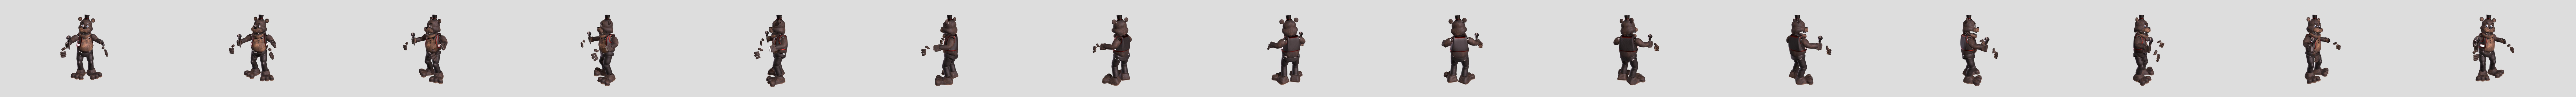 Adventure FNaF+ Freddy Port - Download Free 3D model by PuppyGamesStudio  (@diogoqleandro) [a516ce9]